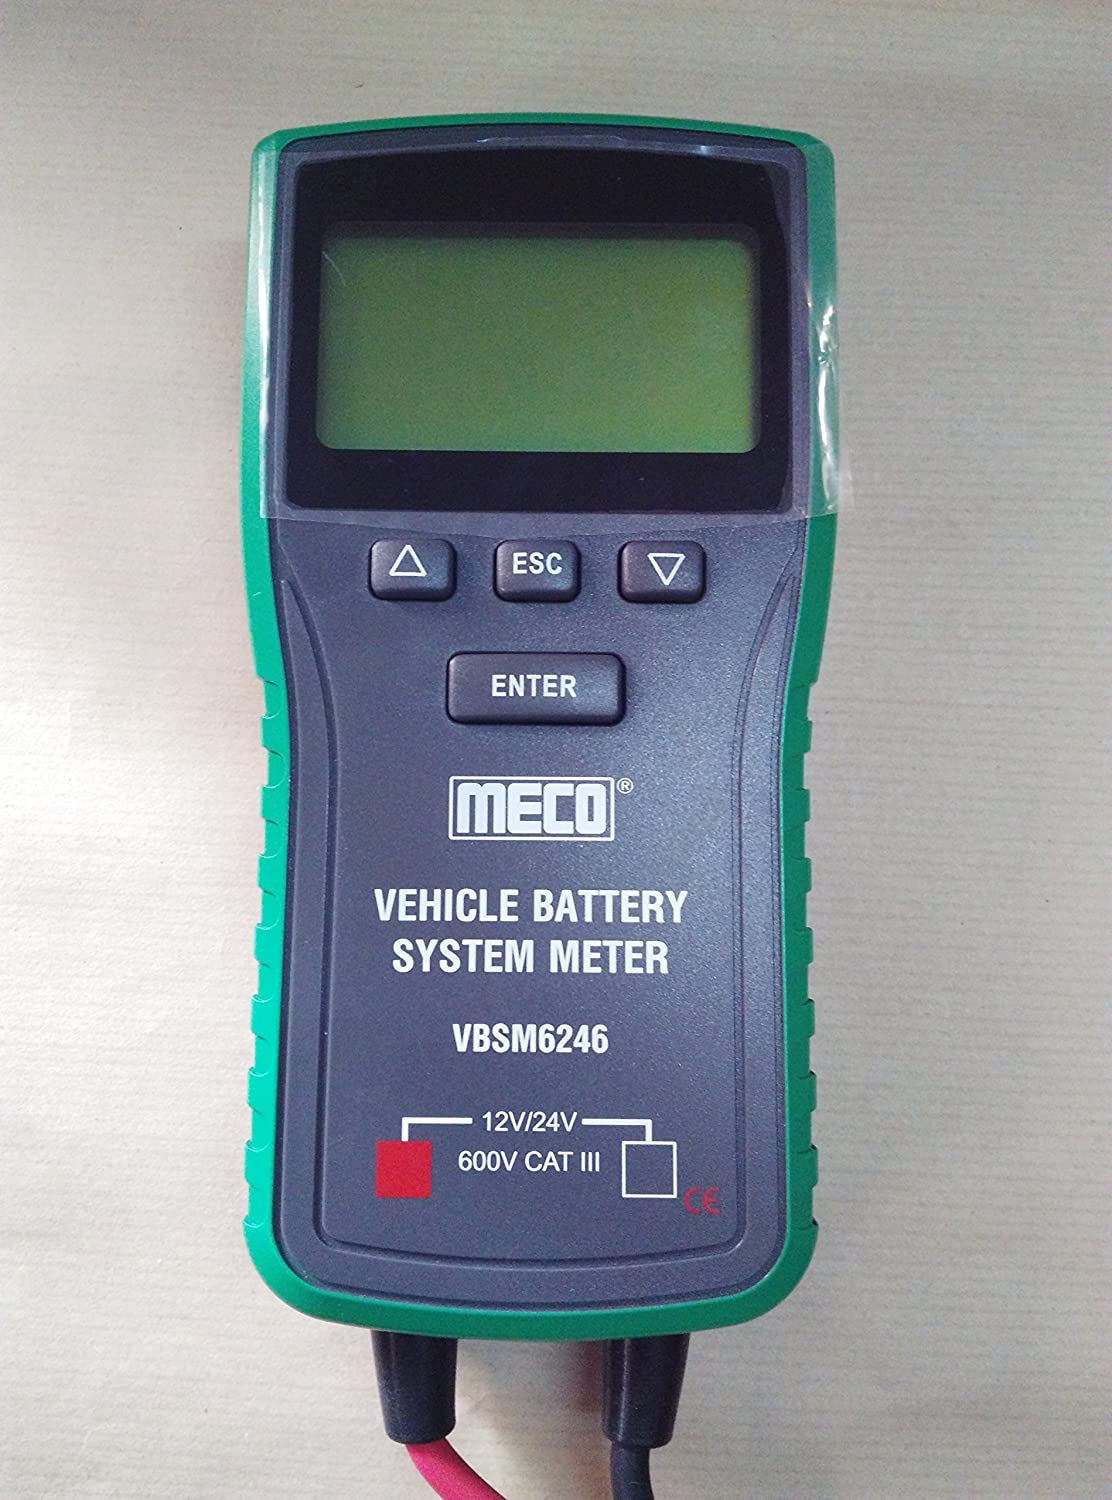 MECO VBSM6246 Vehicle Battery System Meter